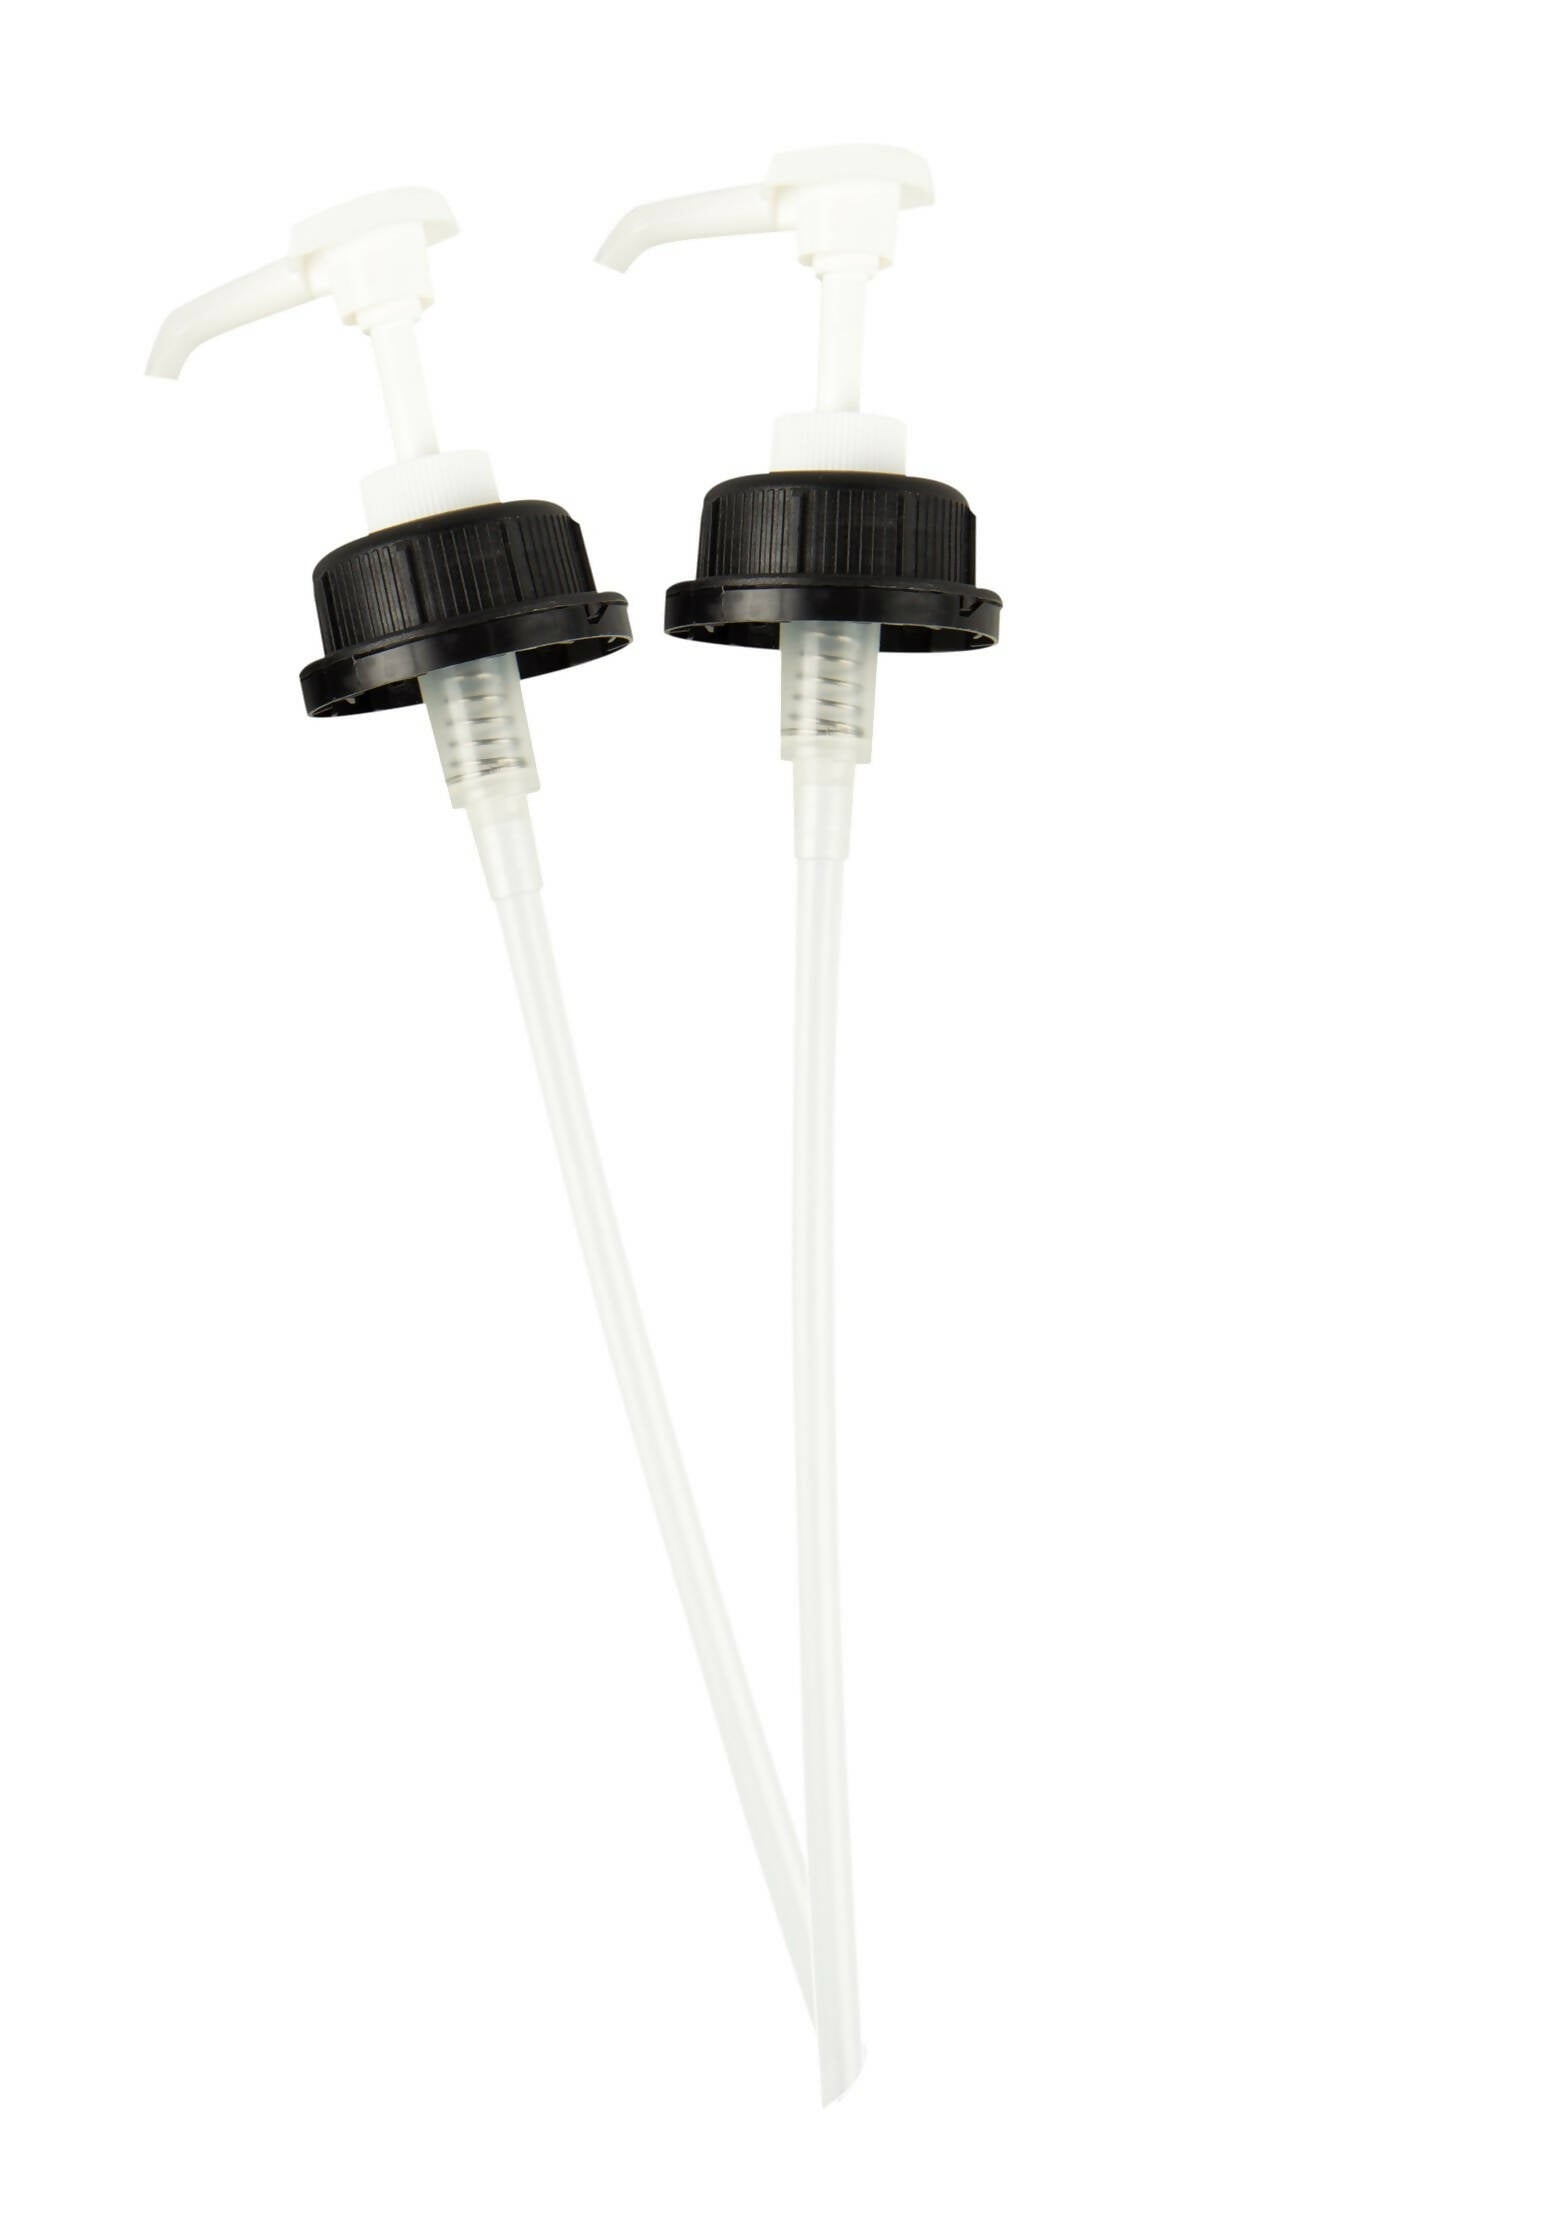 SORIFA - Set of 2 - Dosing pump for 5L SORIFA brand cans - For gels and liquid soaps.